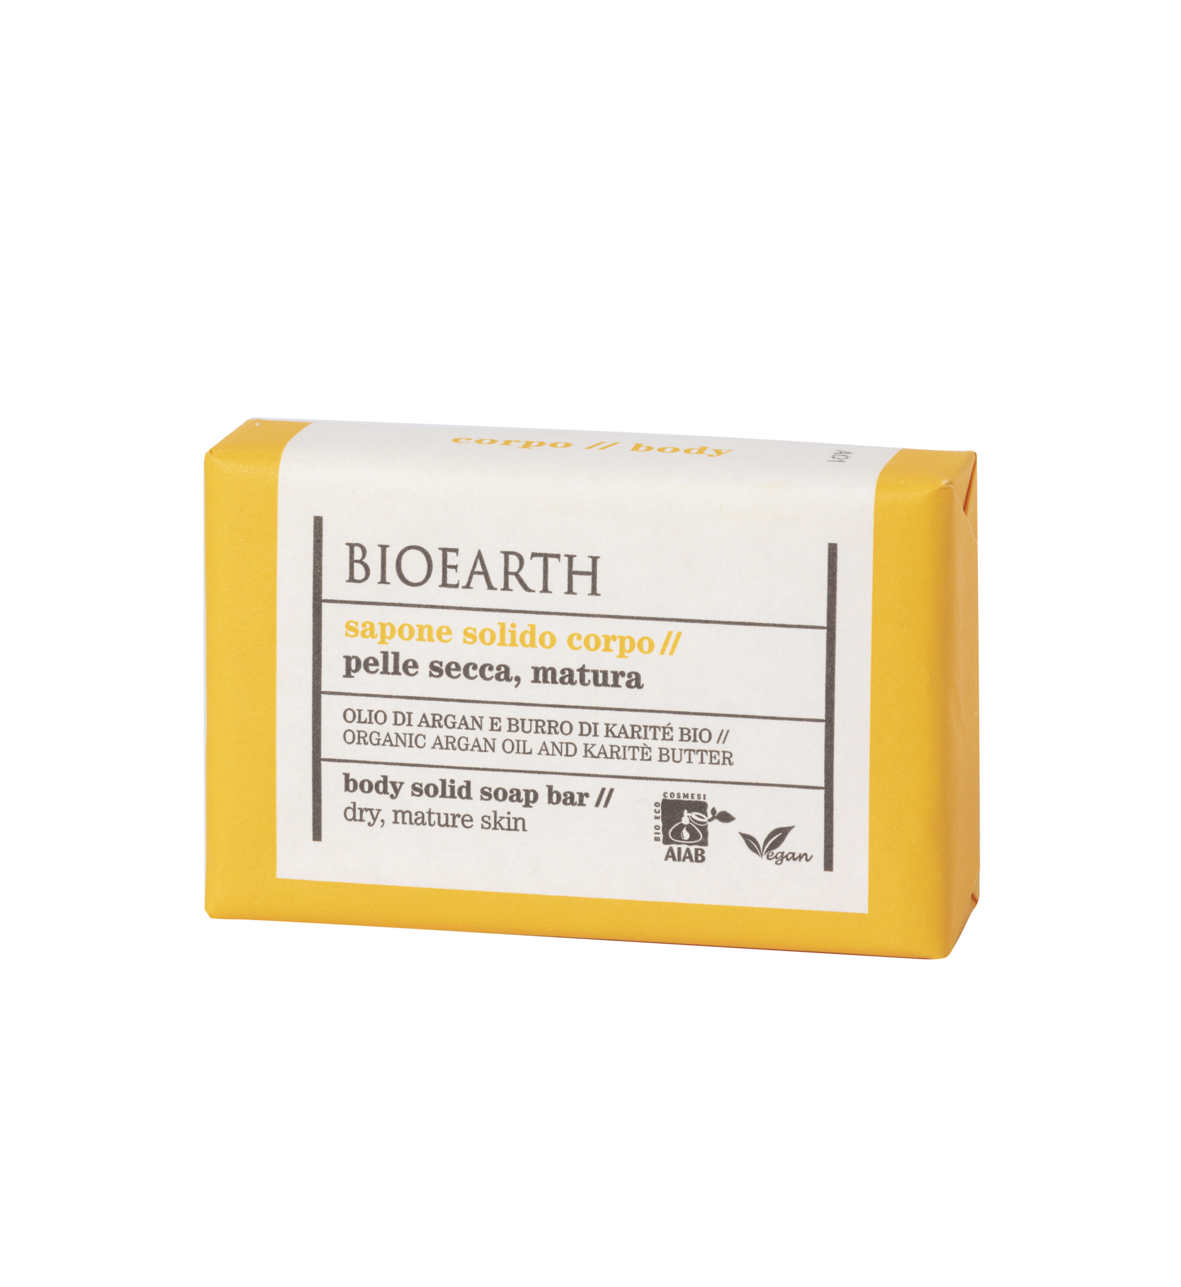 Bioearth - Solid Soaps Body Solid Soap - Organic Argan Oil And Shea Butter - 150g